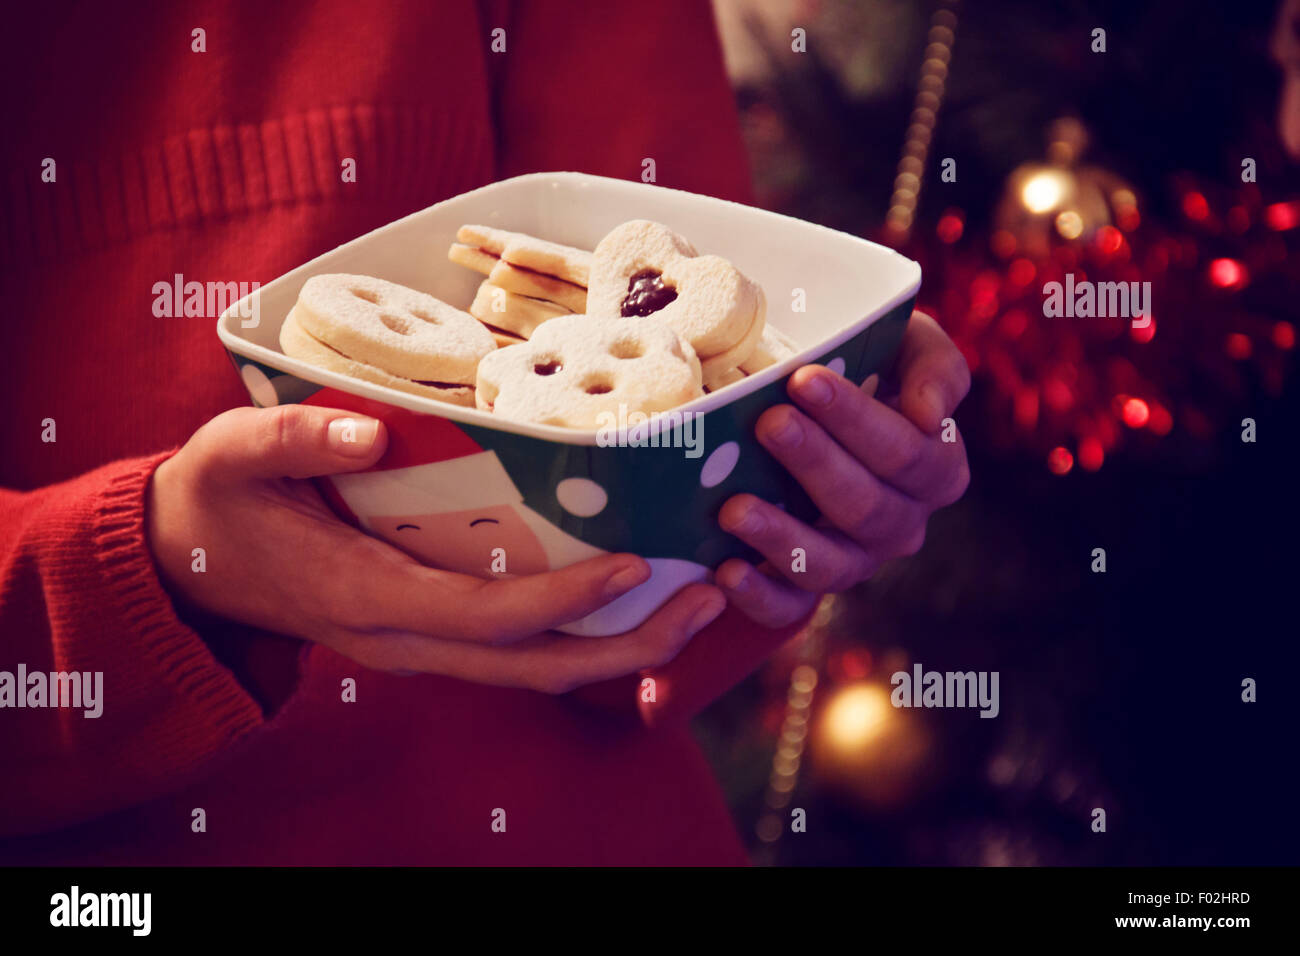 Girl holding bowl with Christmas cookies Stock Photo